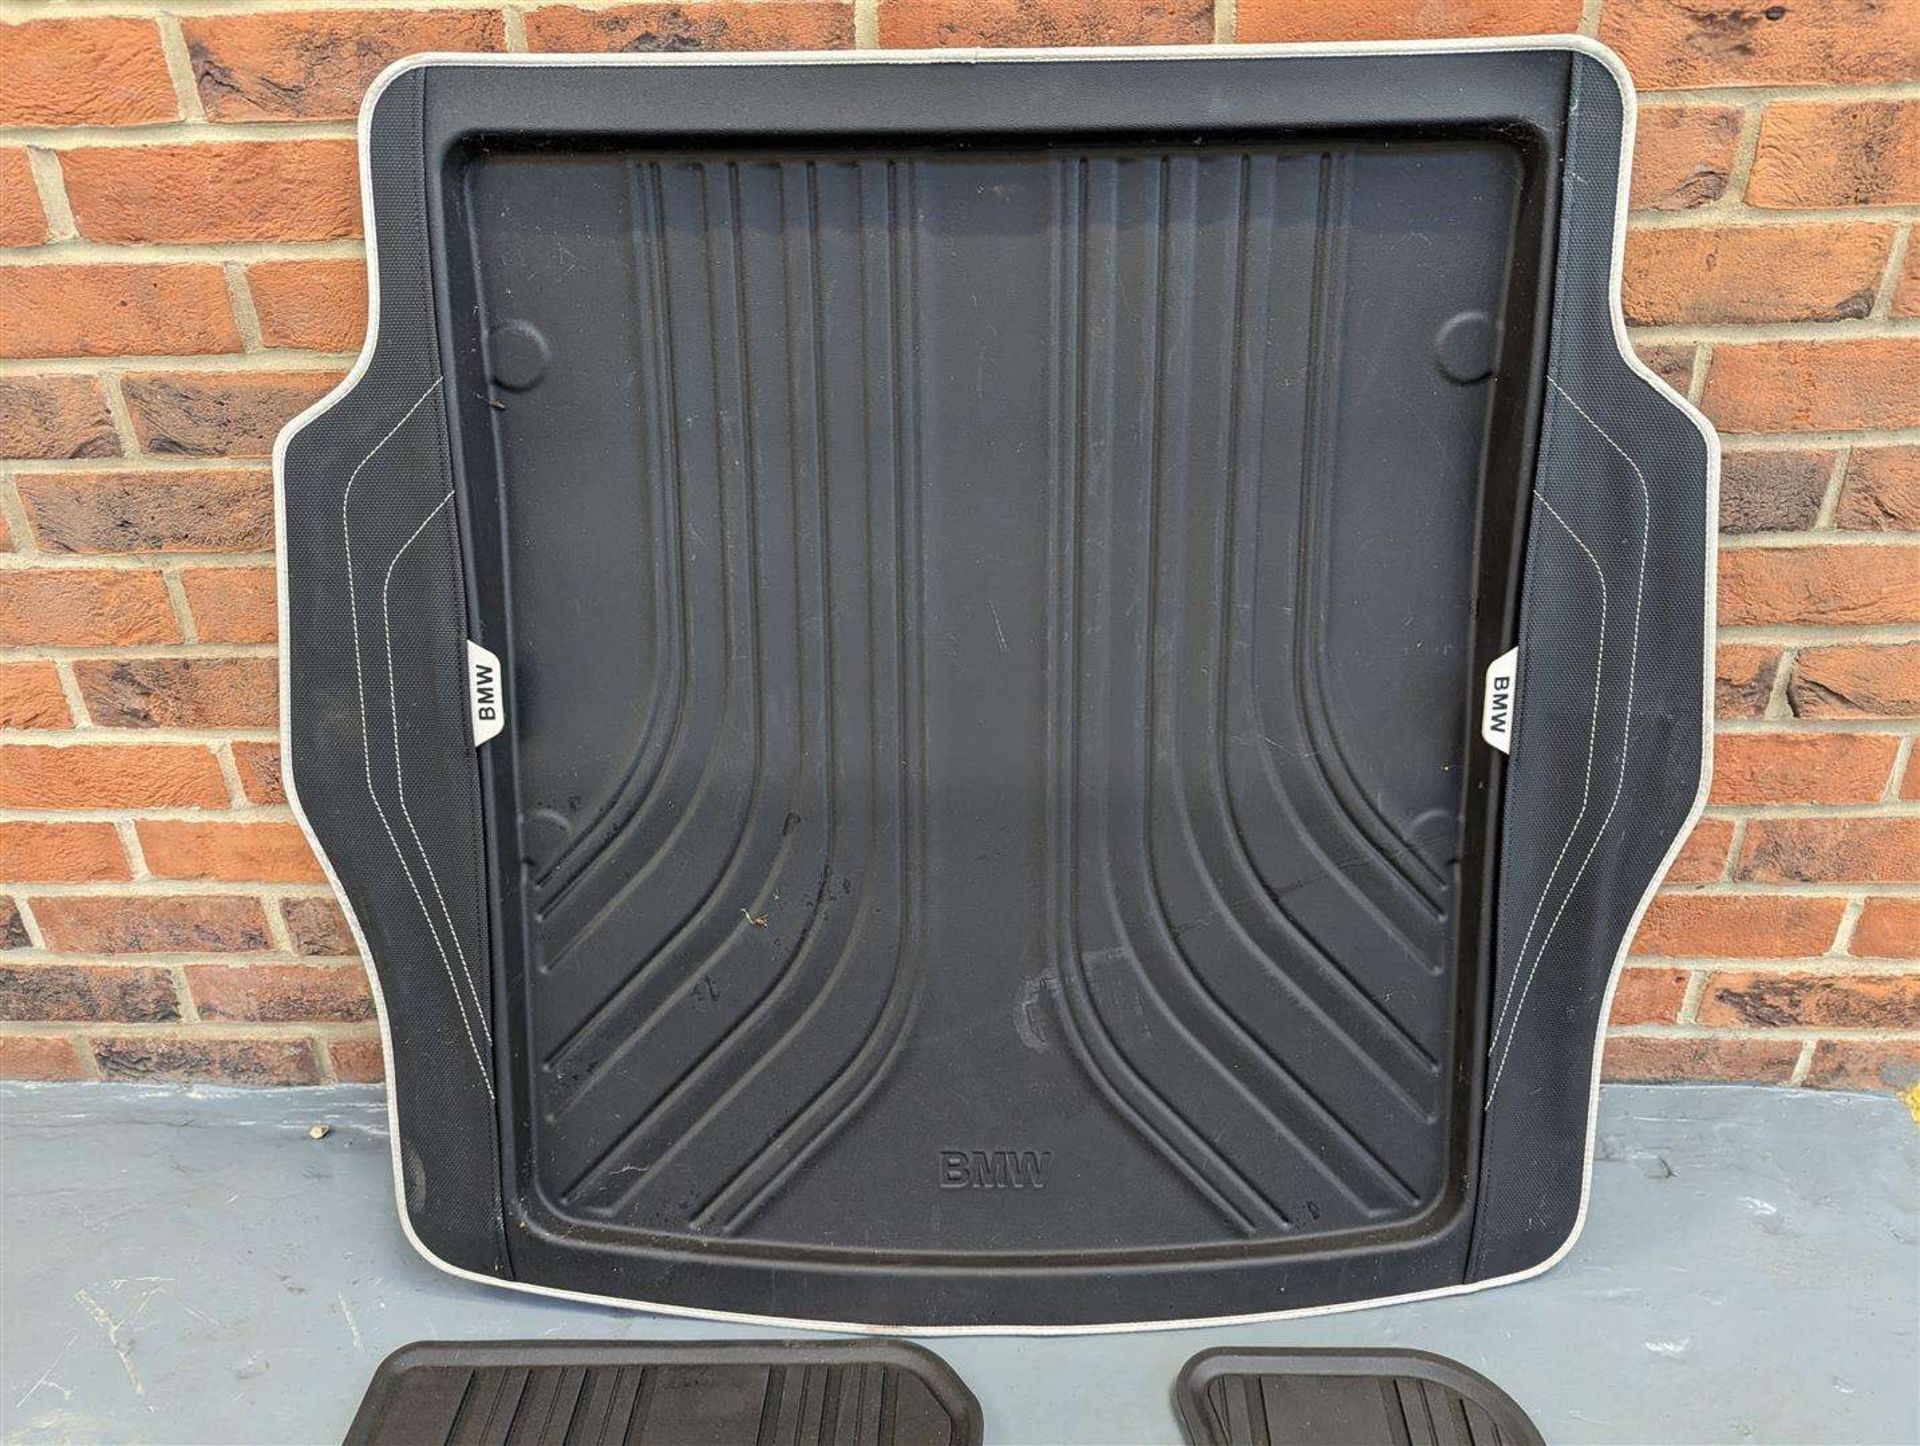 NEW BOOT TRAY &amp; FRONT RUBBER MATS FOR BMW F22 COUPE MODEL - Image 3 of 3